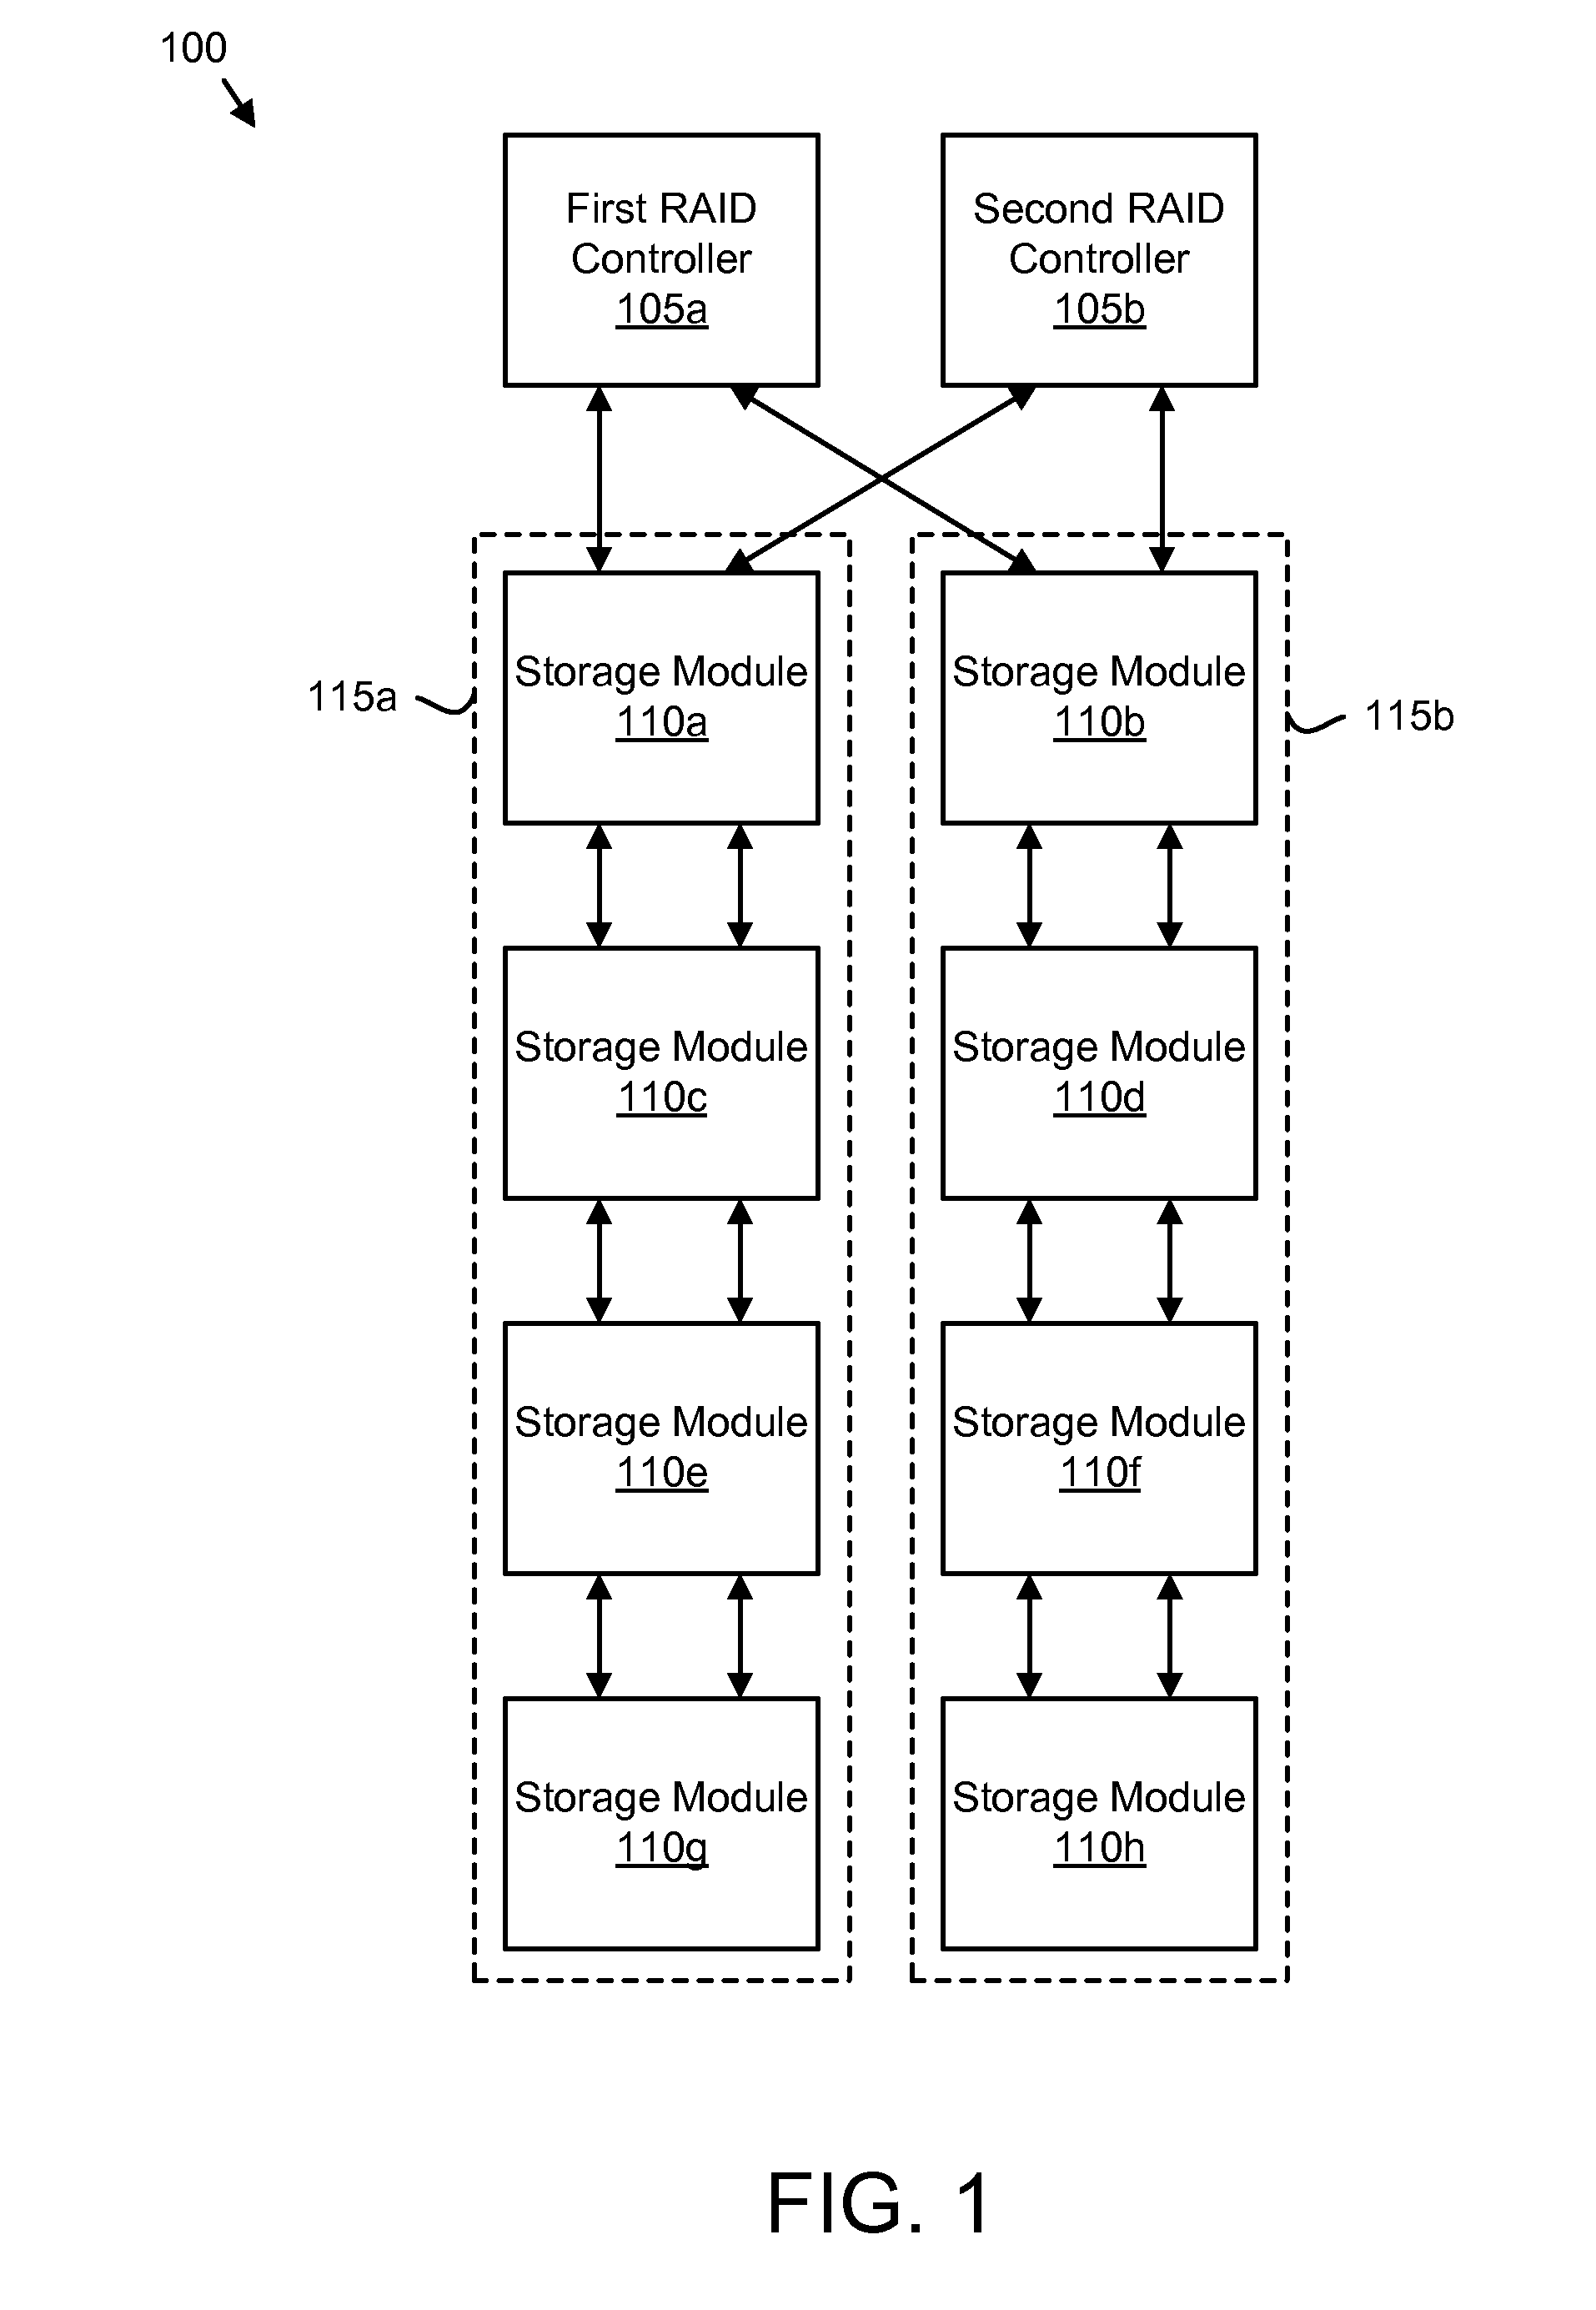 Apparatus, system, and method for selective cross communications between autonomous storage modules